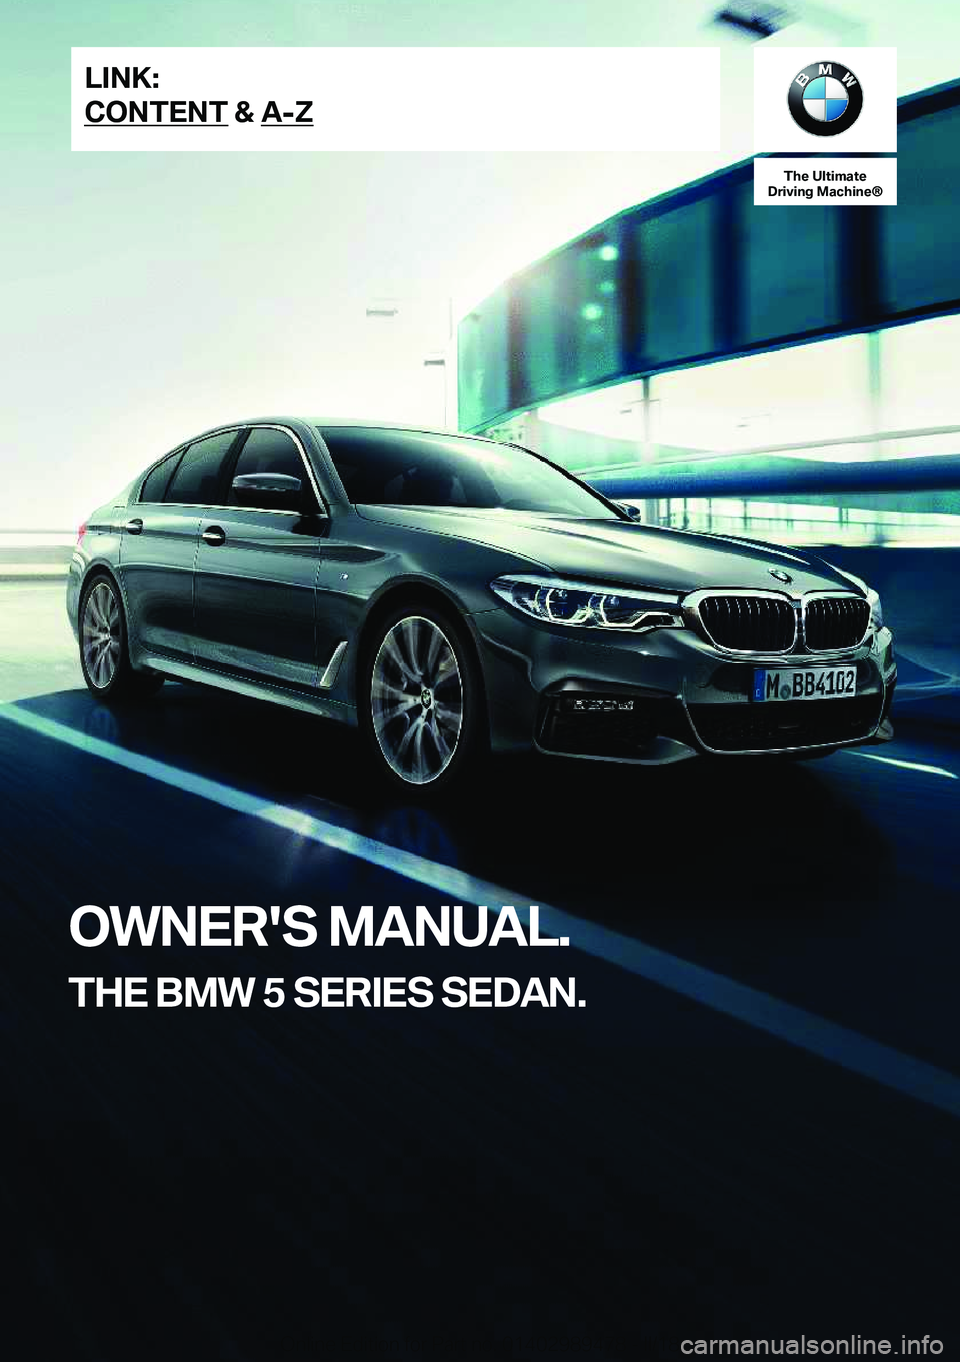 BMW 5 SERIES 2018  Owners Manual �T�h�e��U�l�t�i�m�a�t�e
�D�r�i�v�i�n�g��M�a�c�h�i�n�e�n
�O�W�N�E�R�'�S��M�A�N�U�A�L�.
�T�H�E��B�M�W��5��S�E�R�I�E�S��S�E�D�A�N�.�L�I�N�K�:
�C�O�N�T�E�N�T��&��A�-�Z�O�n�l�i�n�e� �E�d�i�t�i